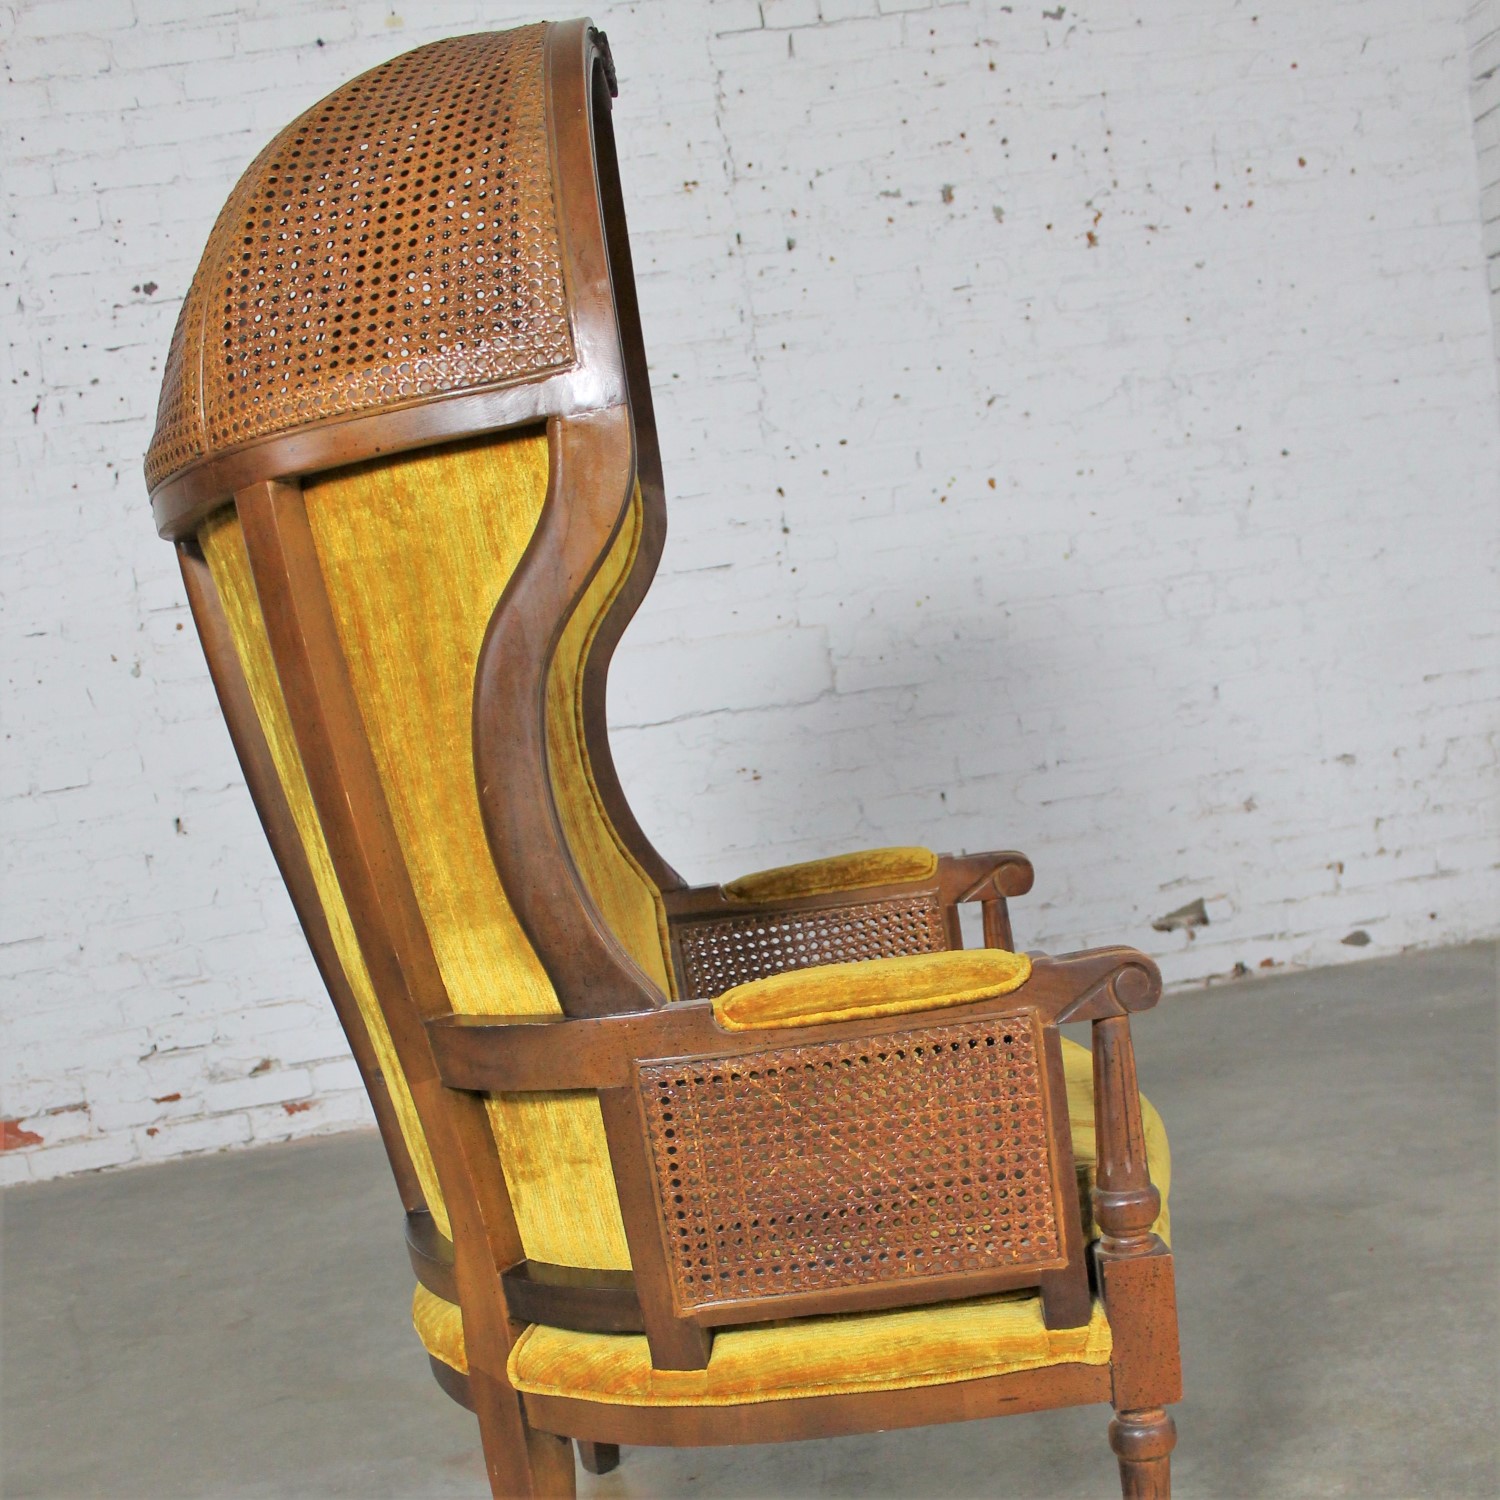 Neoclassical Style Hooded Cane Porter’s Chair Vintage